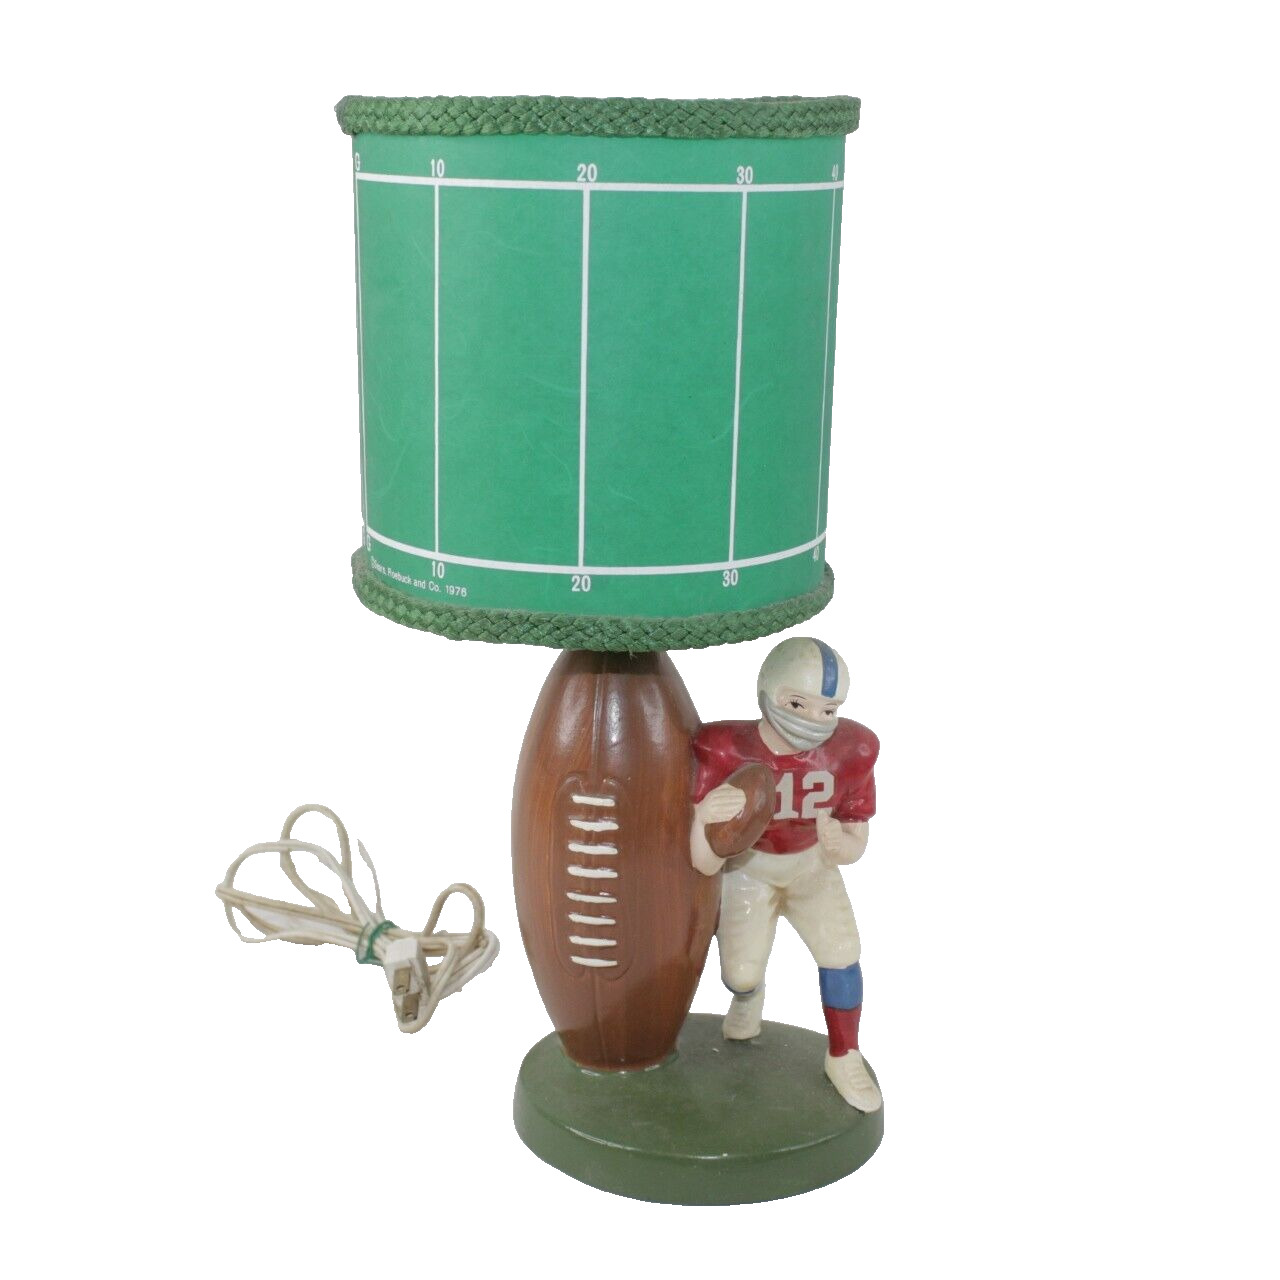 VTG 1976 Sears Roebuck Football Player Theme Lamp w/Shade Made in Japan * Works